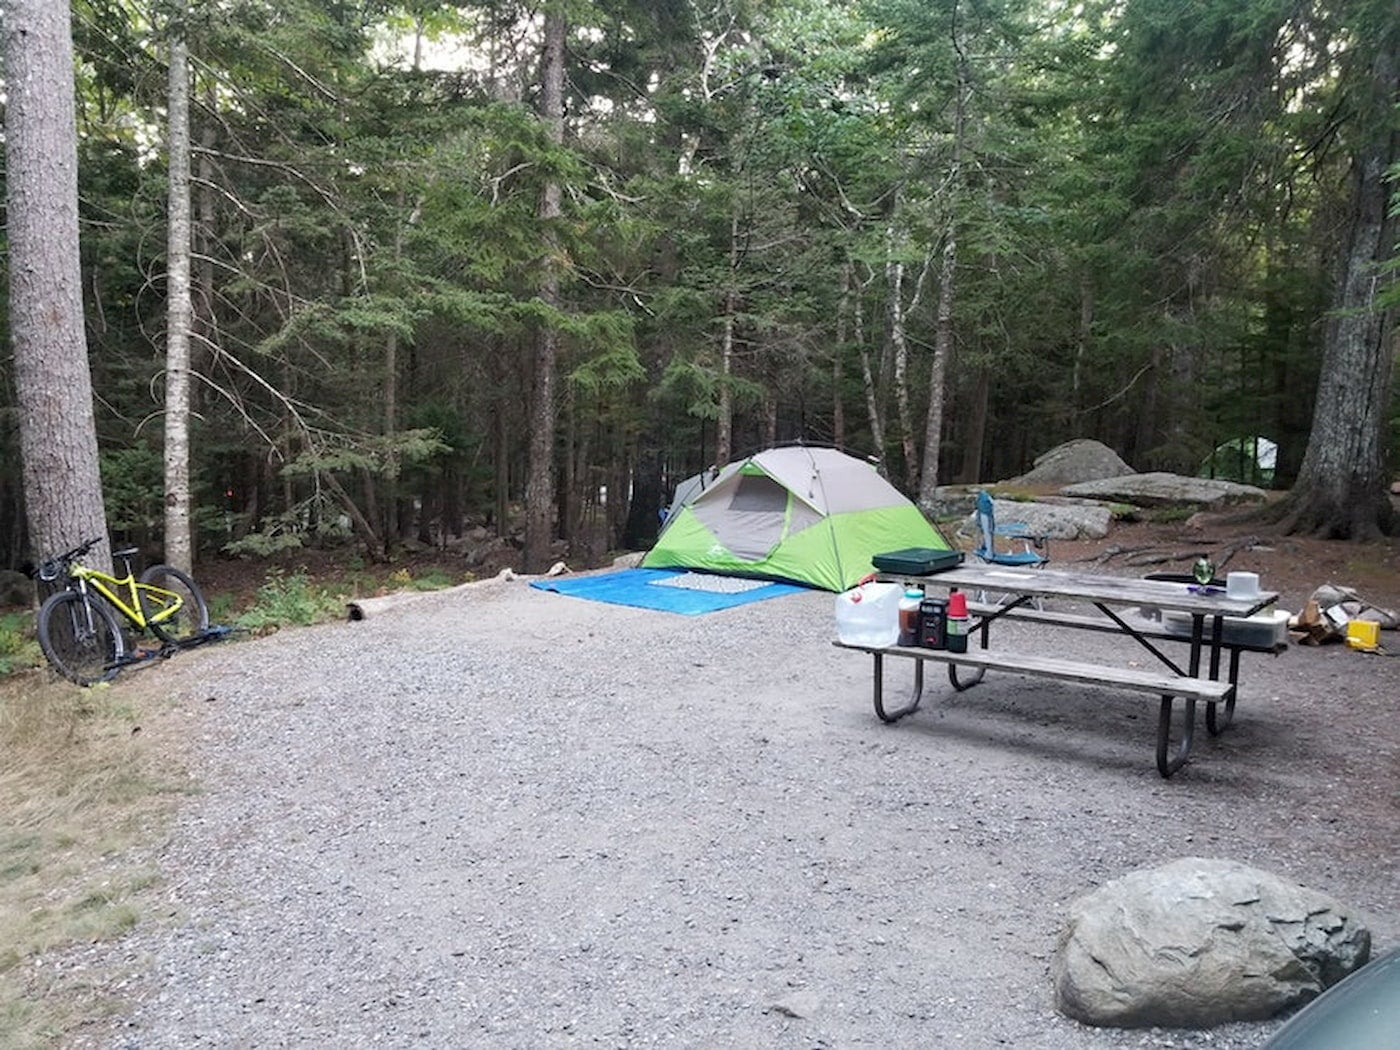 Campsite with green tent and picnic table in clearing in the forest at Acadia National Park.